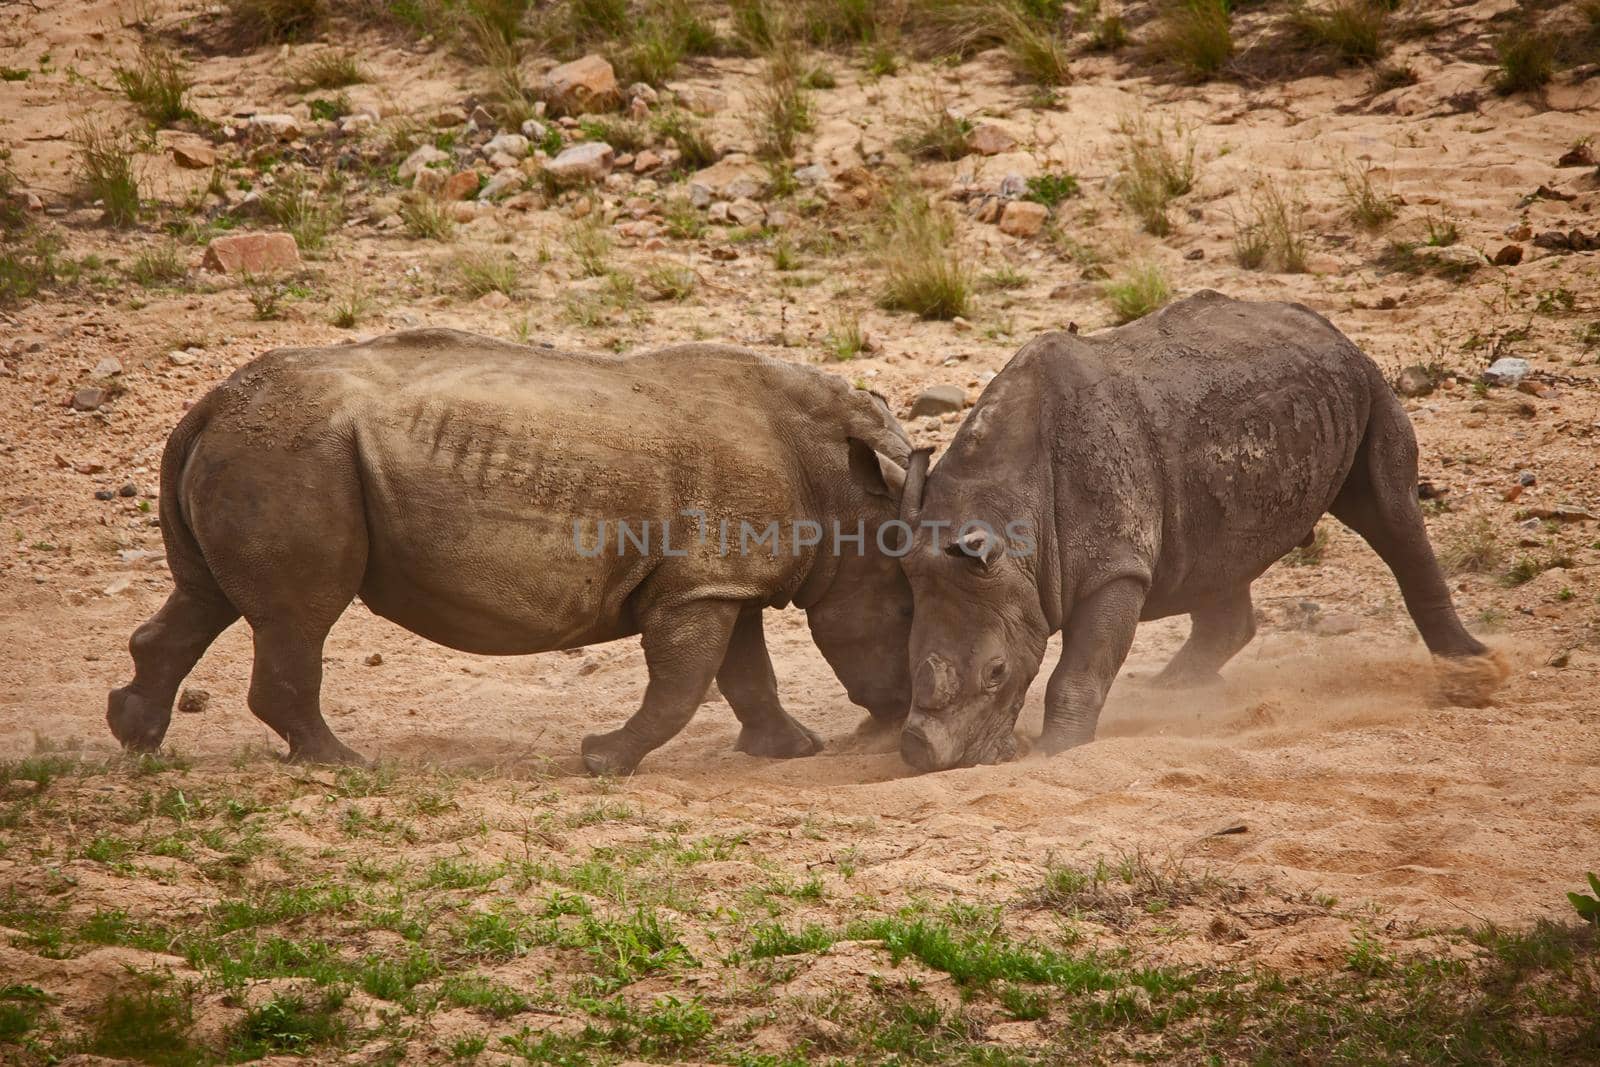 Two dehorned White Rhino (Ceratotherium simum) fighting in Kruger National Park. South African National Parks dehorn rhinos in an attempt curb poaching